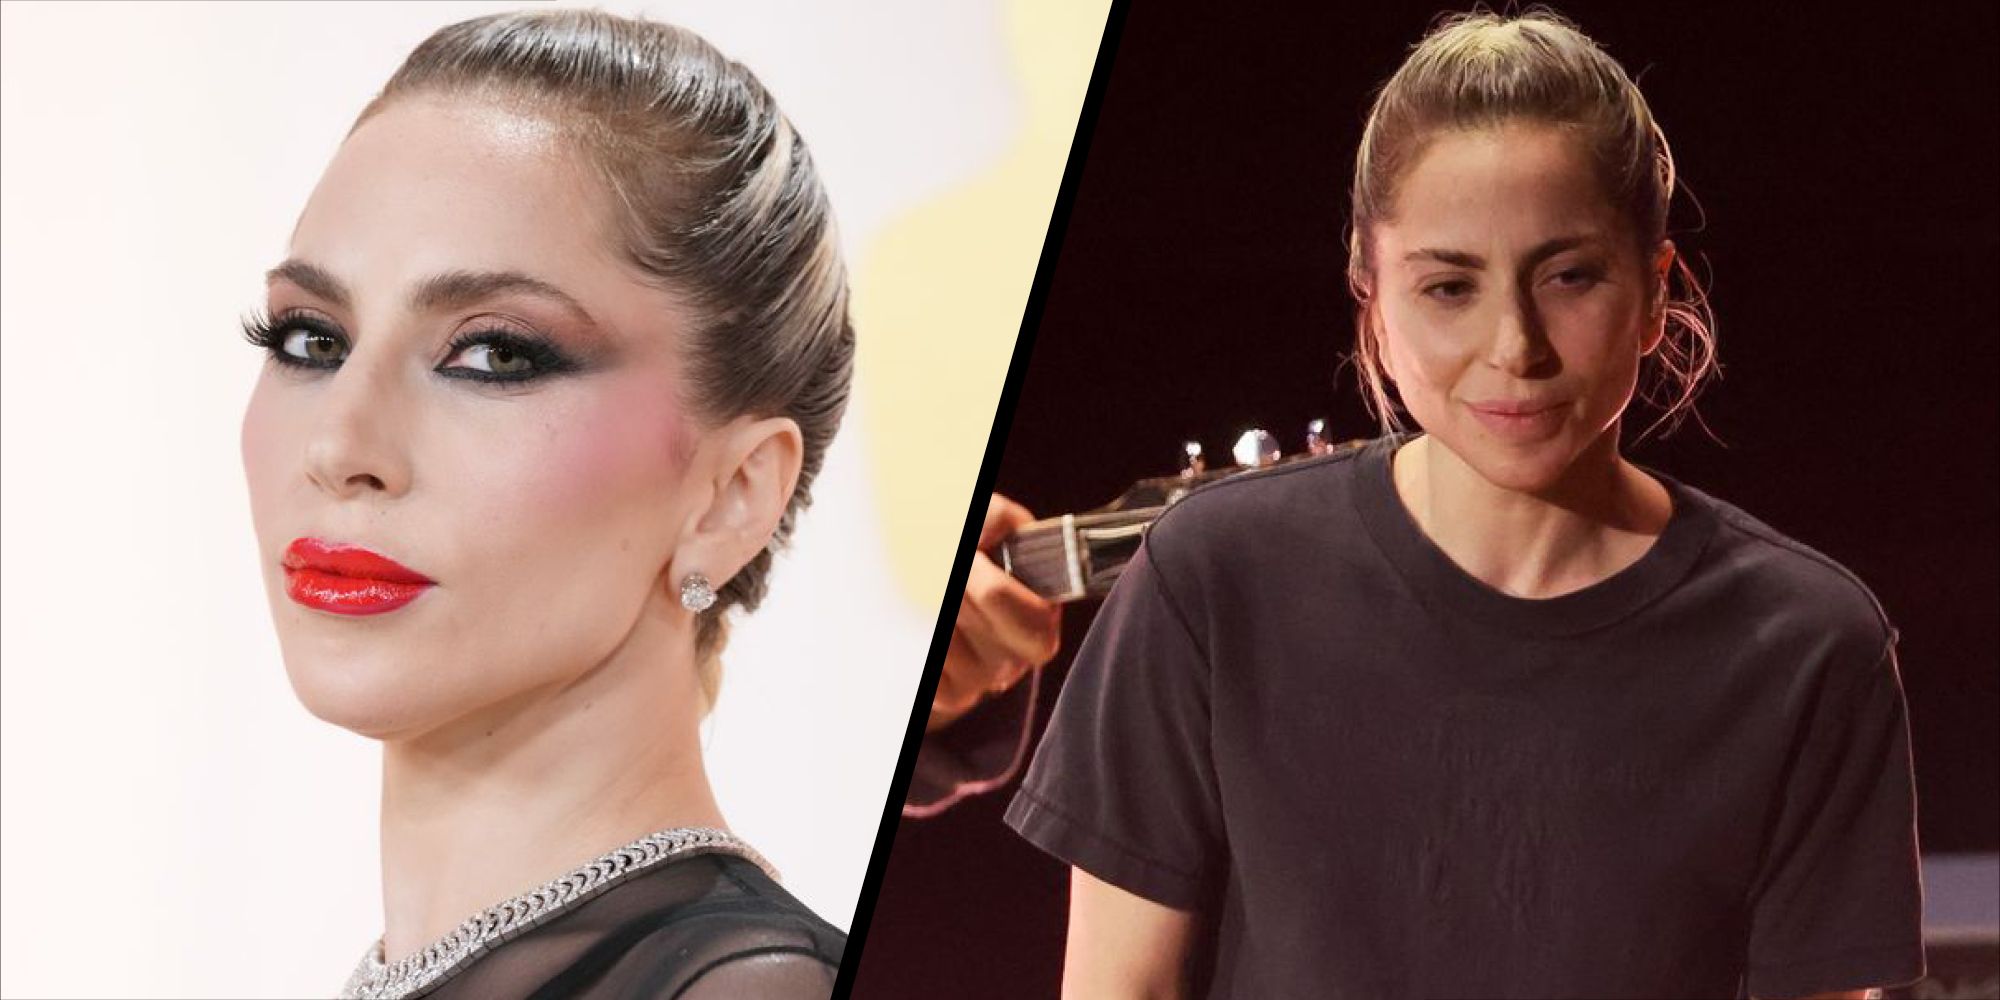 Lady Gaga removed her make-up for a performance at the Oscars